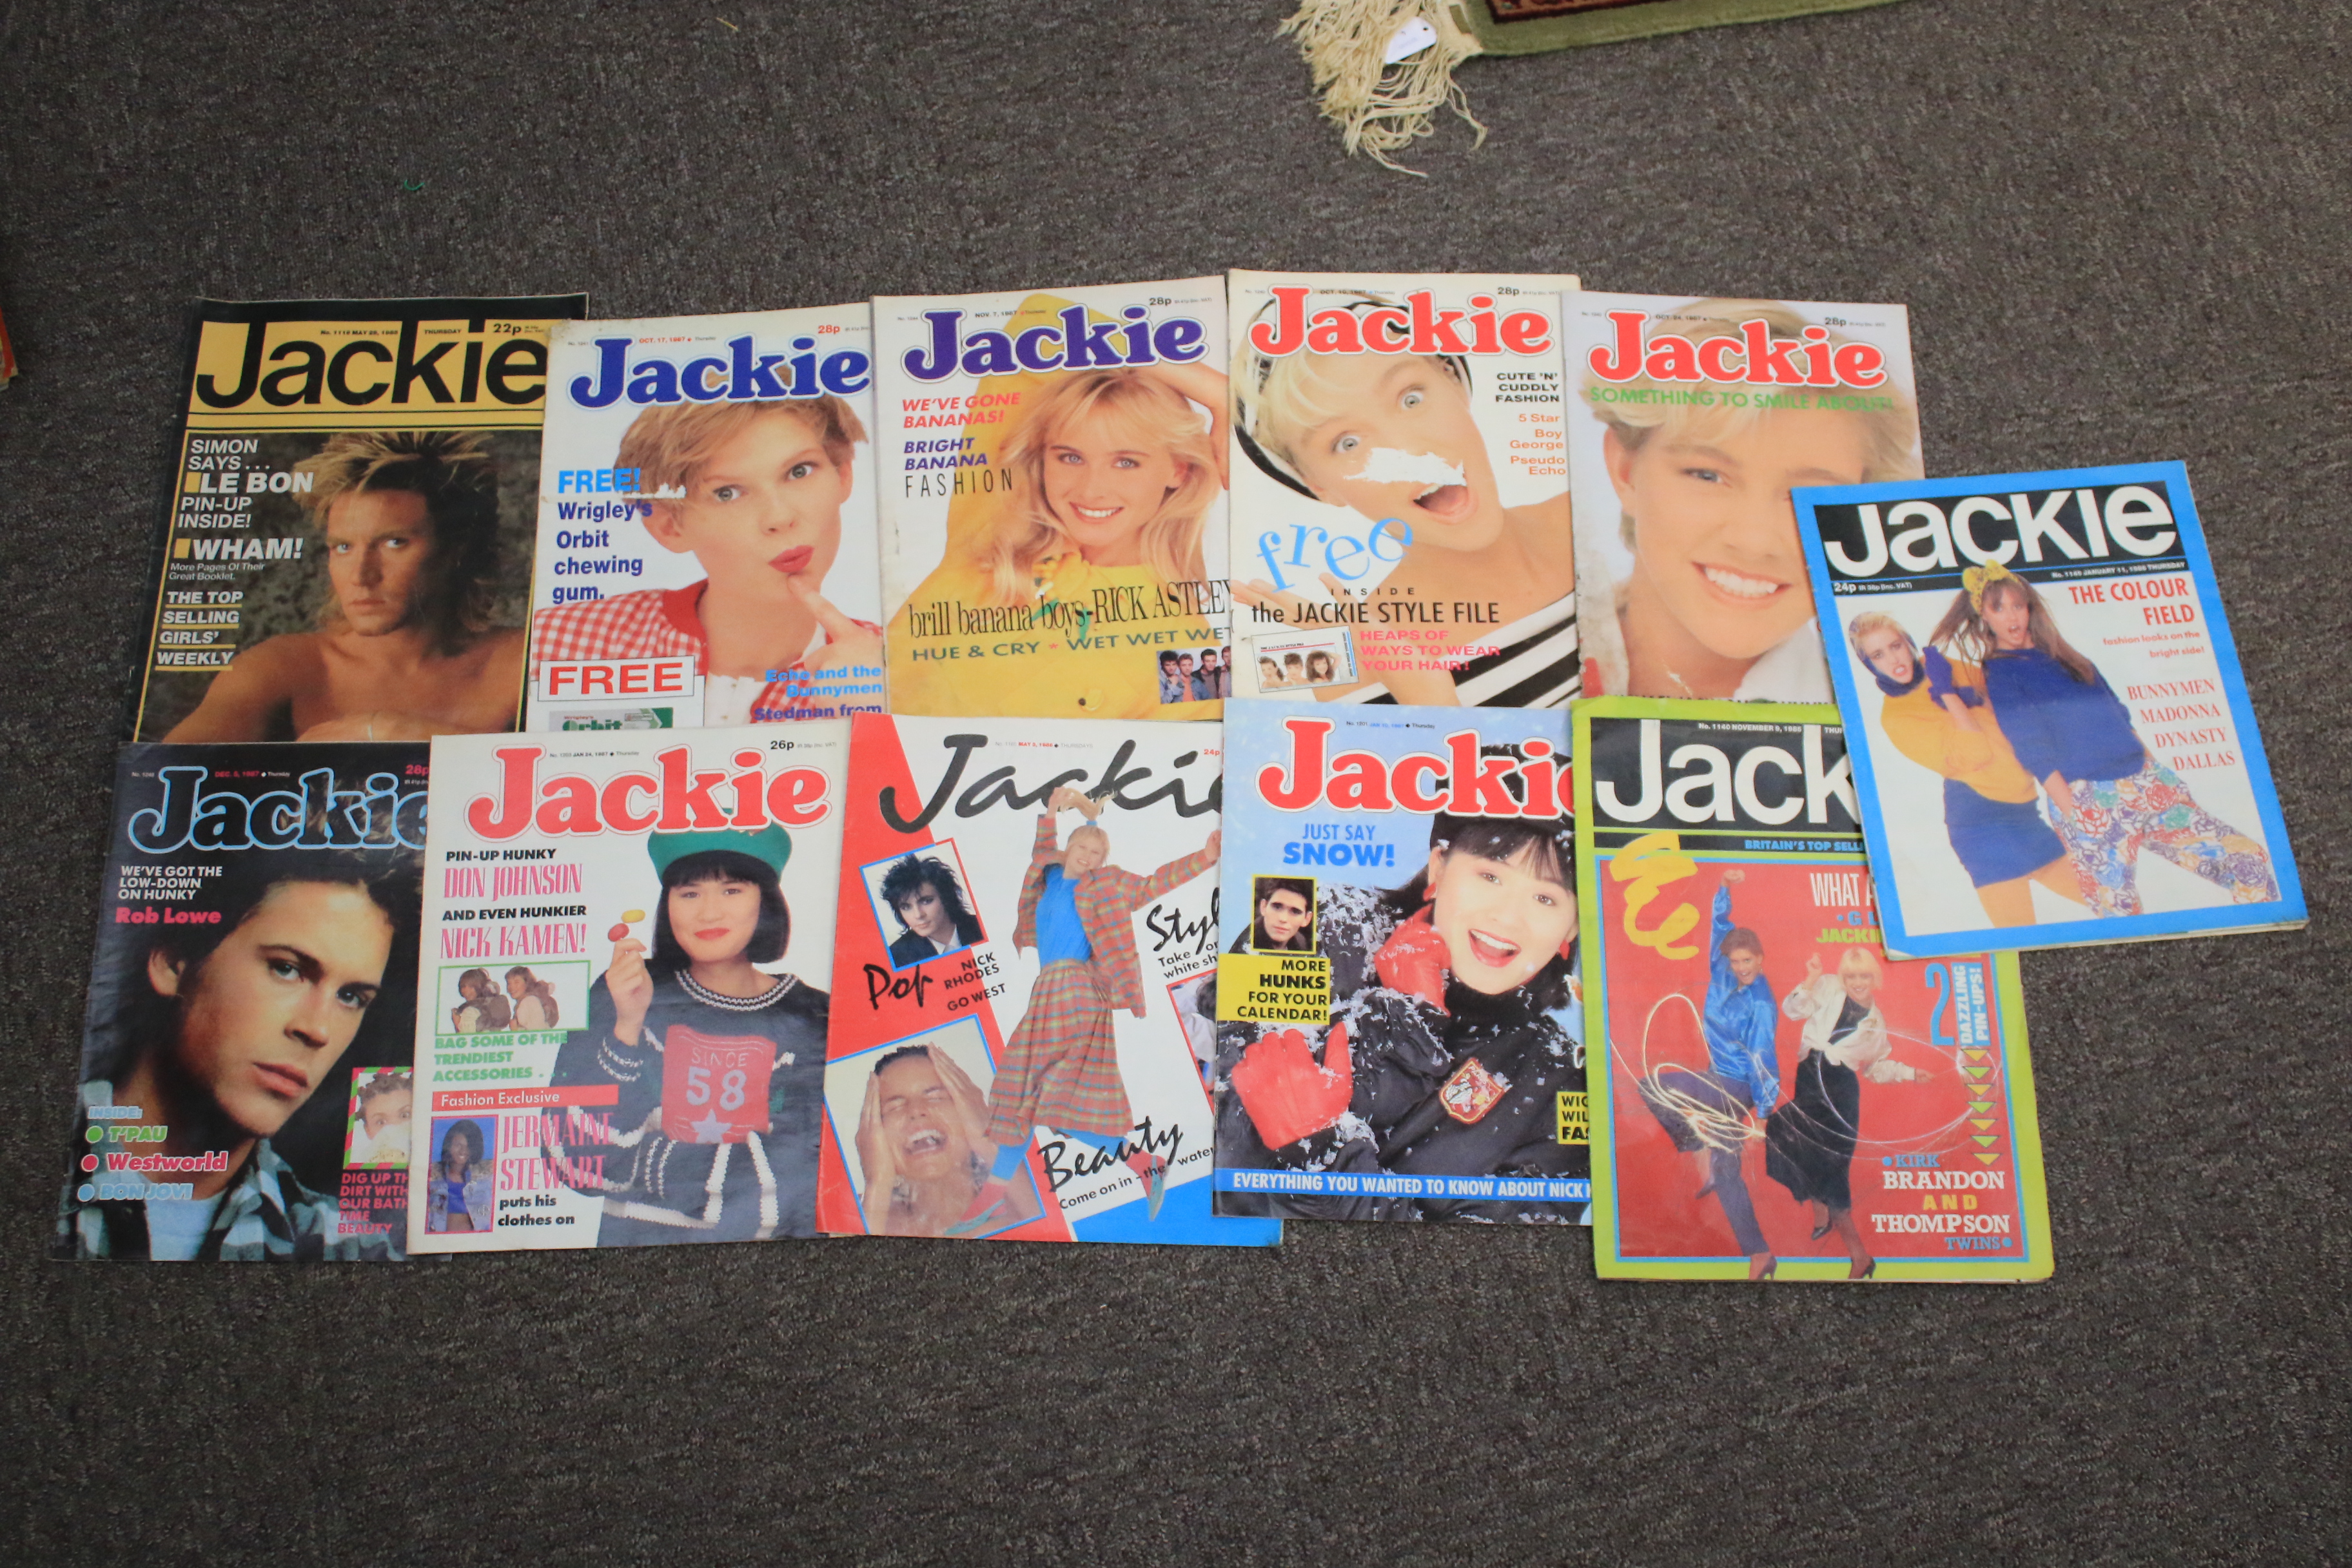 Approx 150 vintage comic books and magazines, Jackie and Sunny stories 1960s - 1980s. - Image 7 of 7